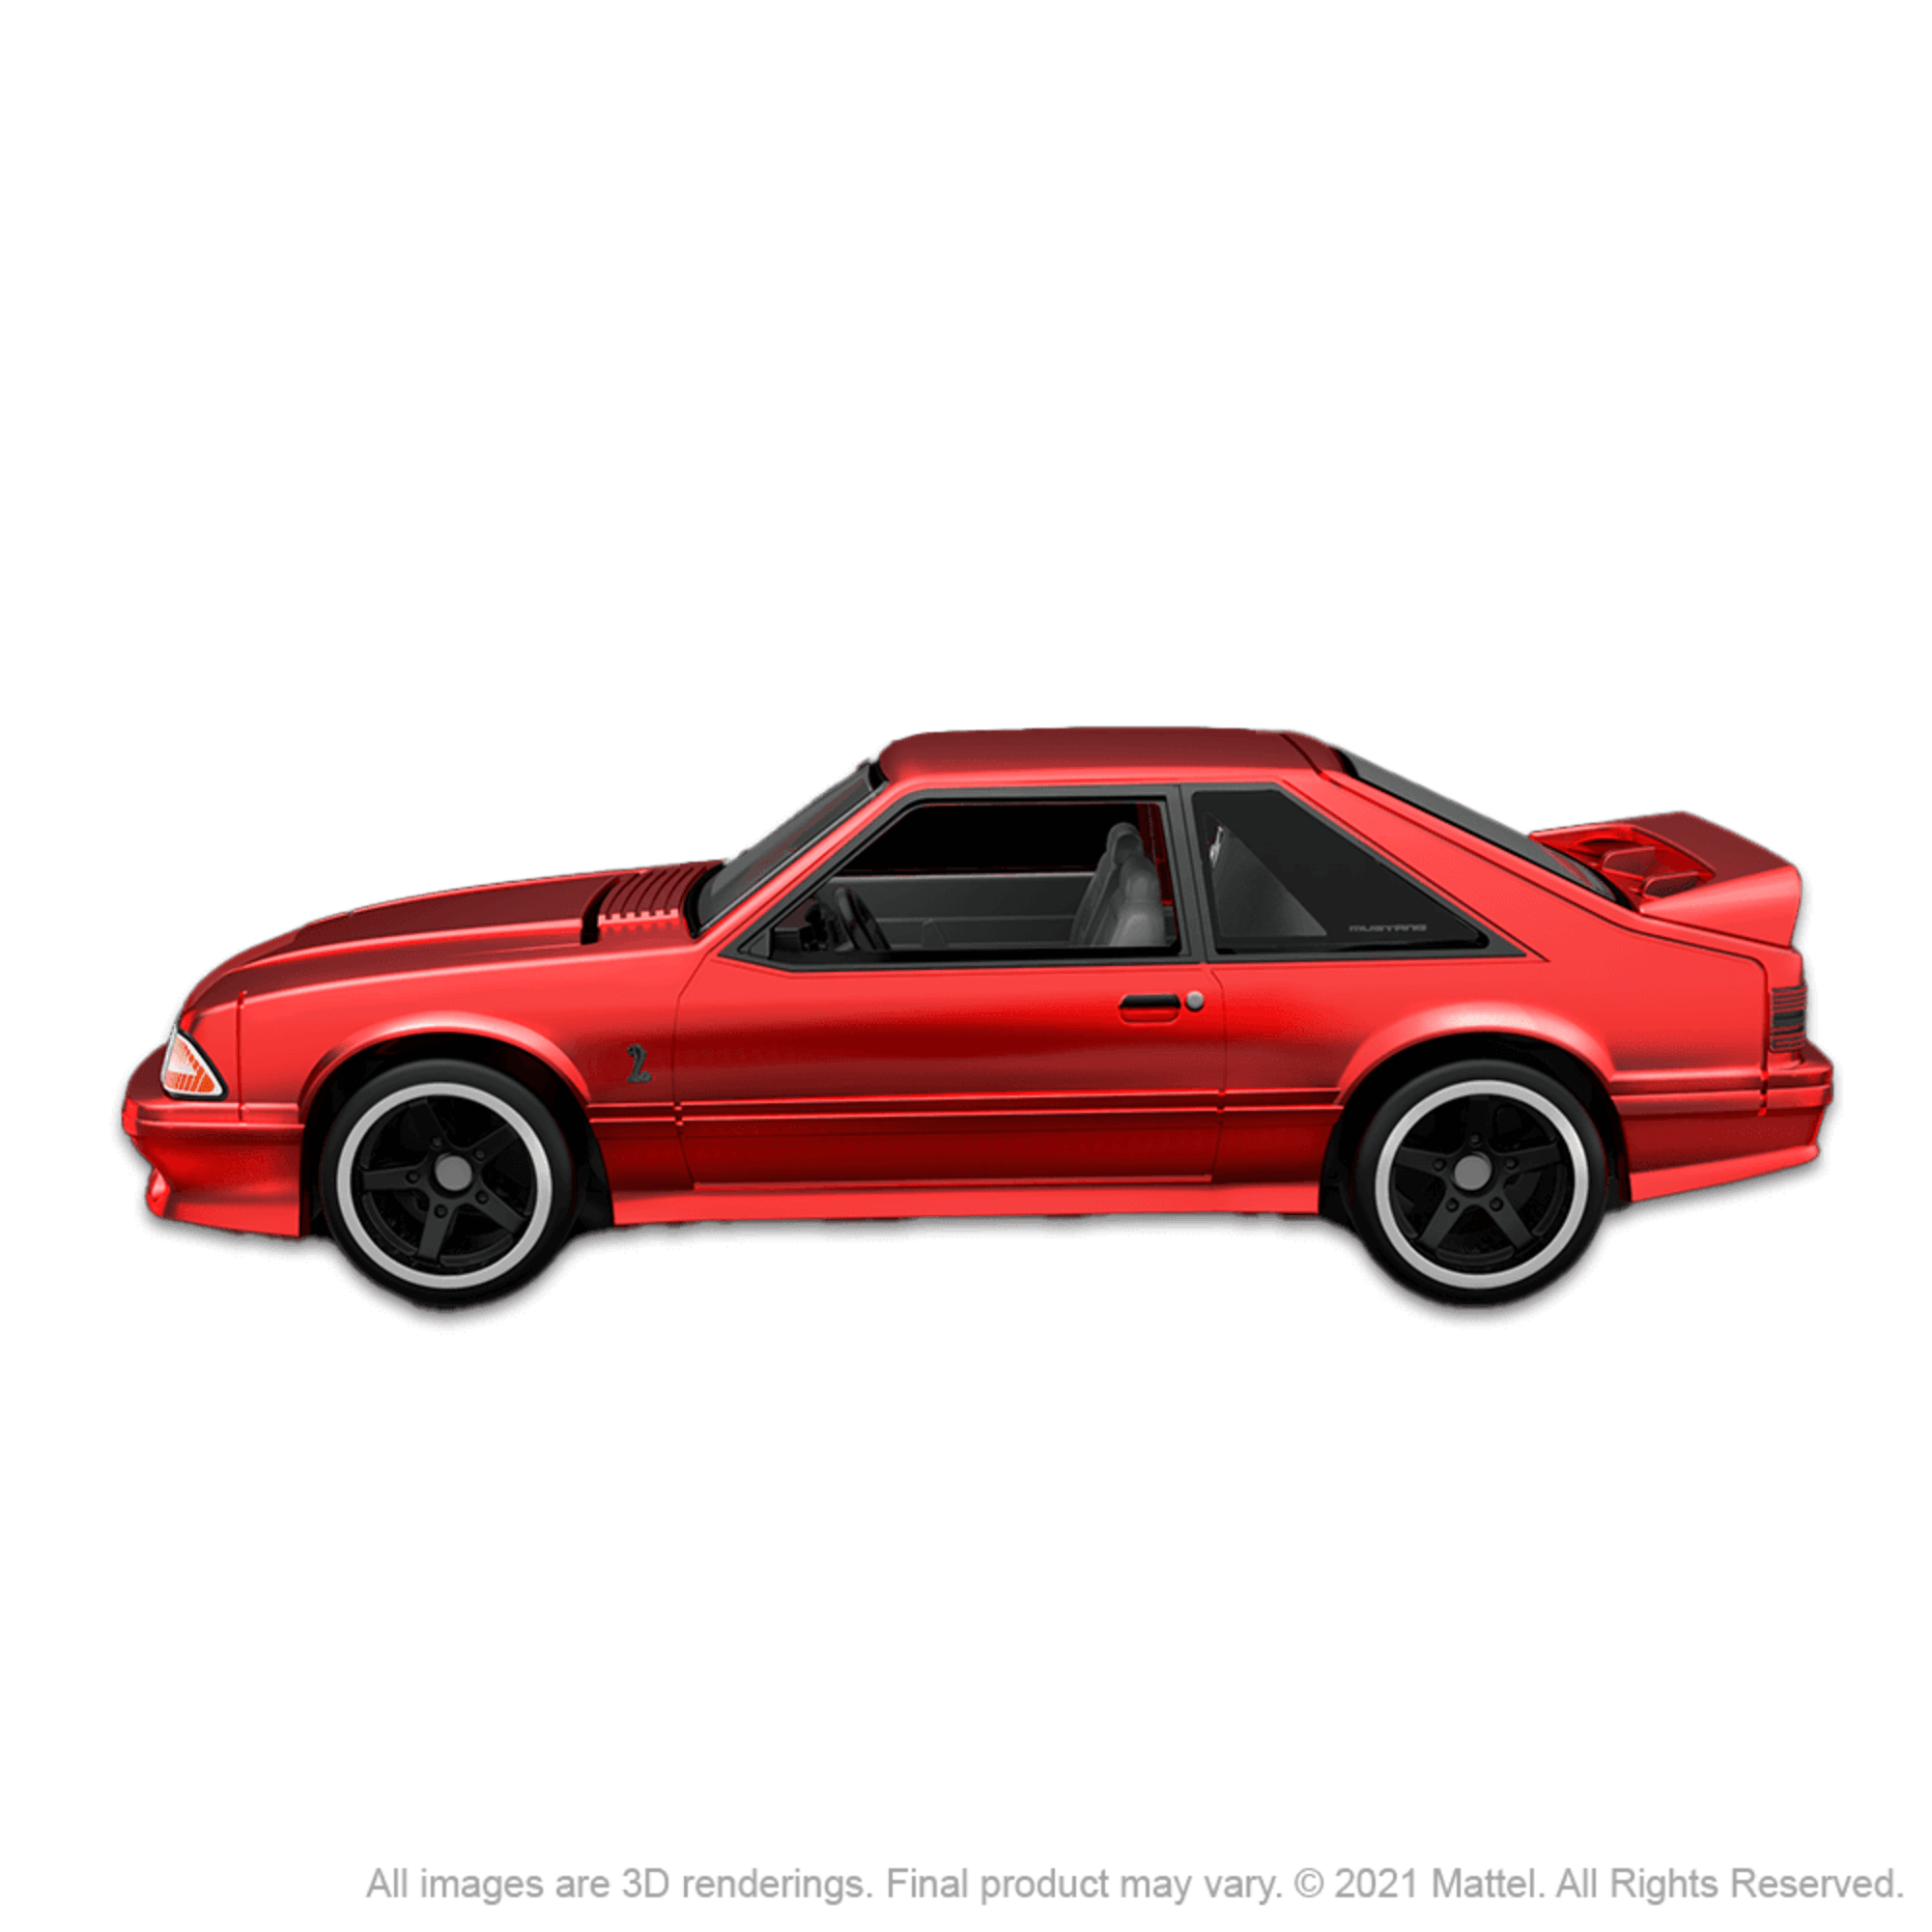 RLC Exclusive 1993 Ford Mustang Cobra R